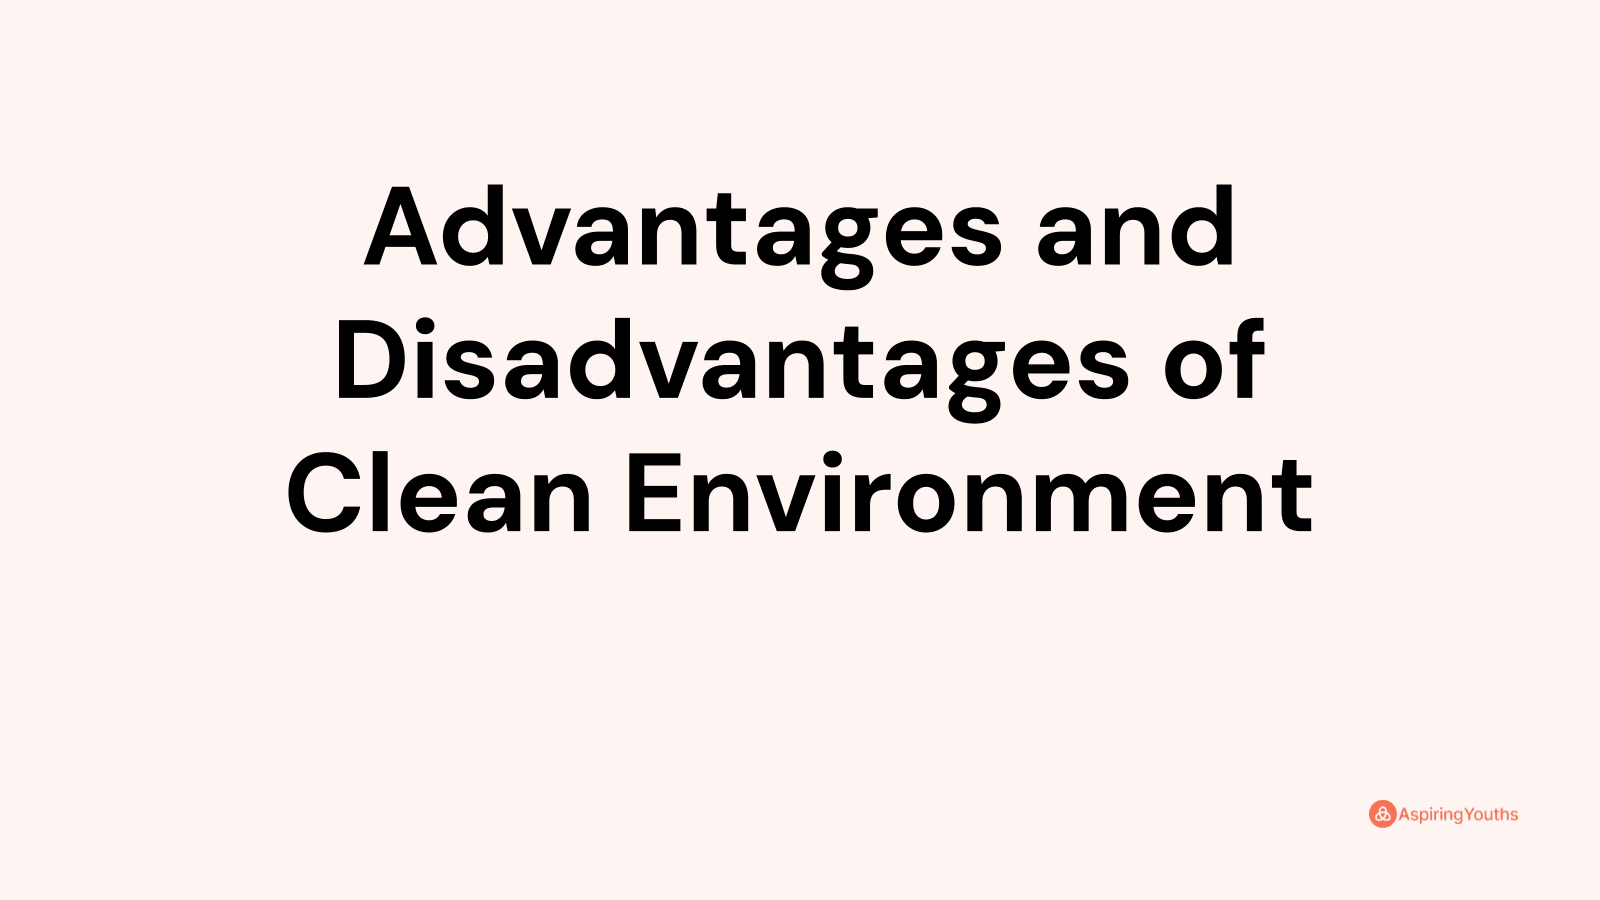 Advantages and disadvantages of Clean Environment